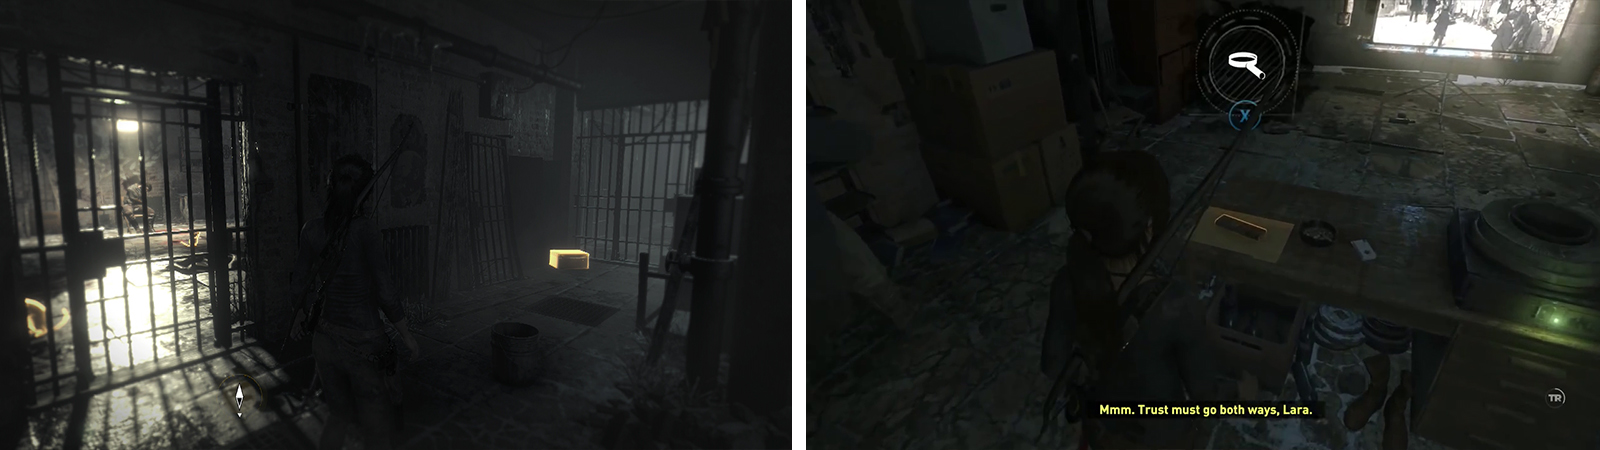 before leaving the cell area, look for Relic 06 to the right of the doorway (left). In the room with the projector you’ll find Document 12 (right).